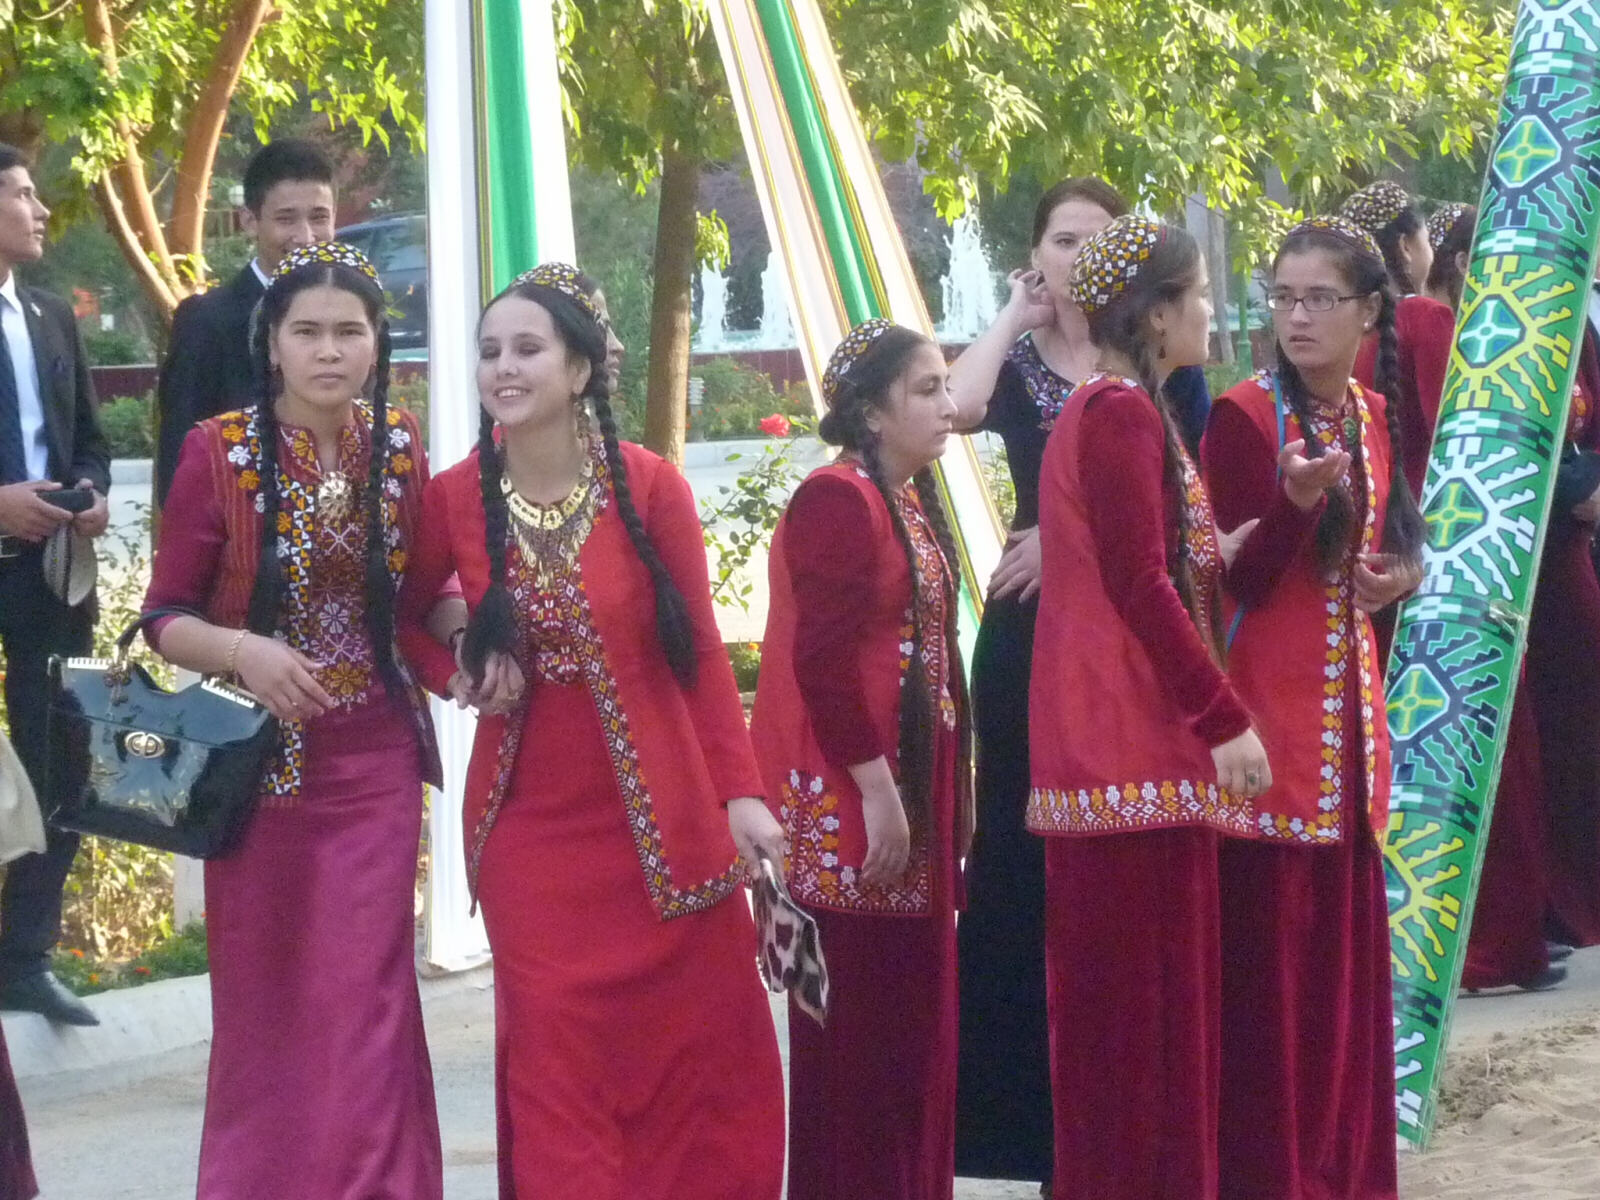 Ladies in their 'Sunday best' clothes in the park in Ashgabat, Turkmenistan